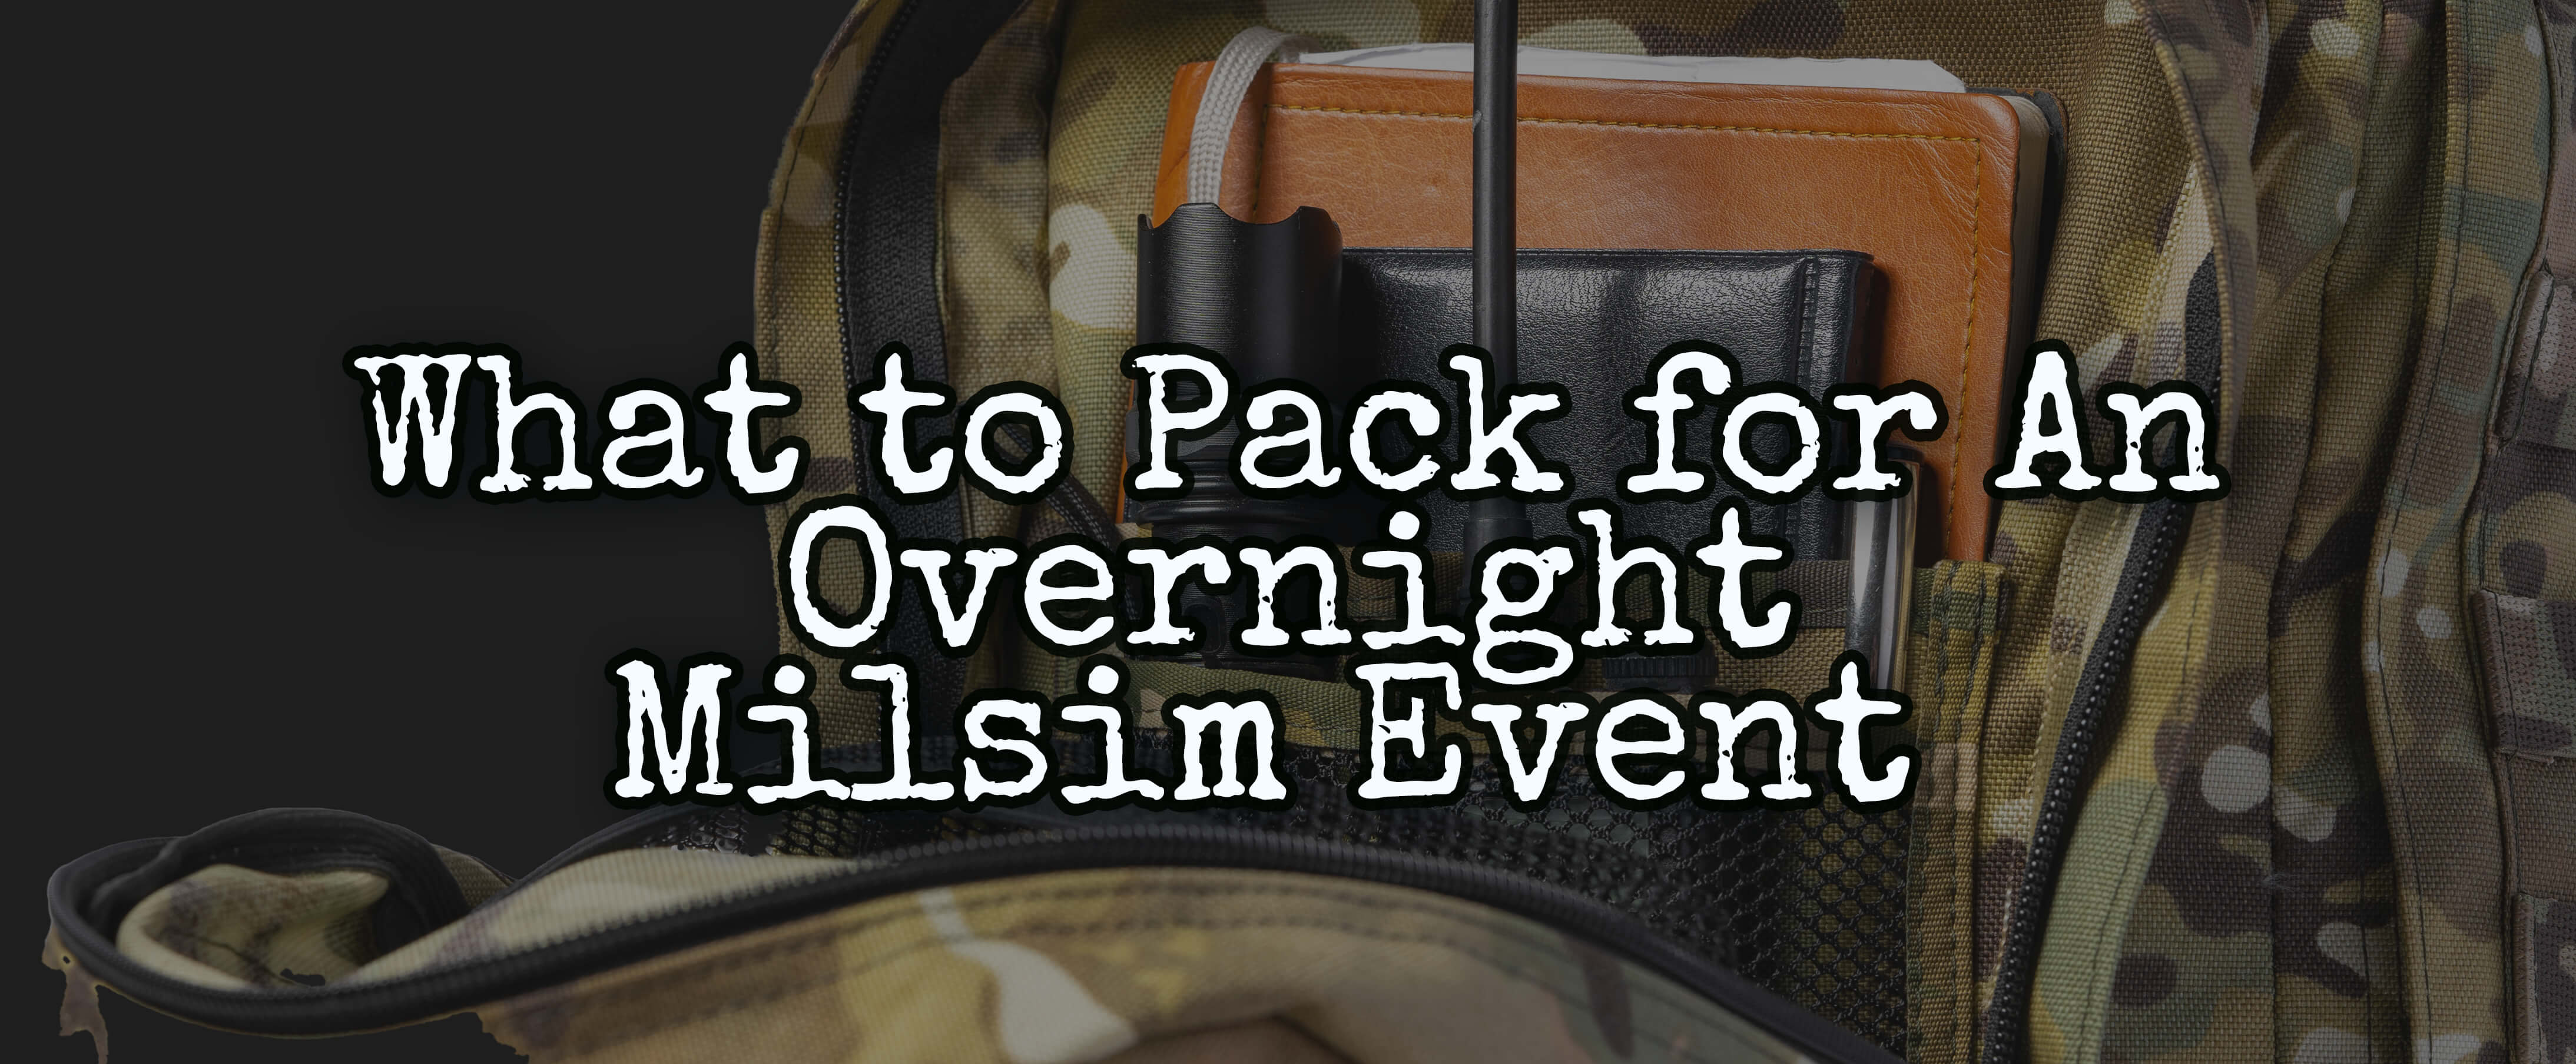 What to Pack For An Overnight Milsim Event